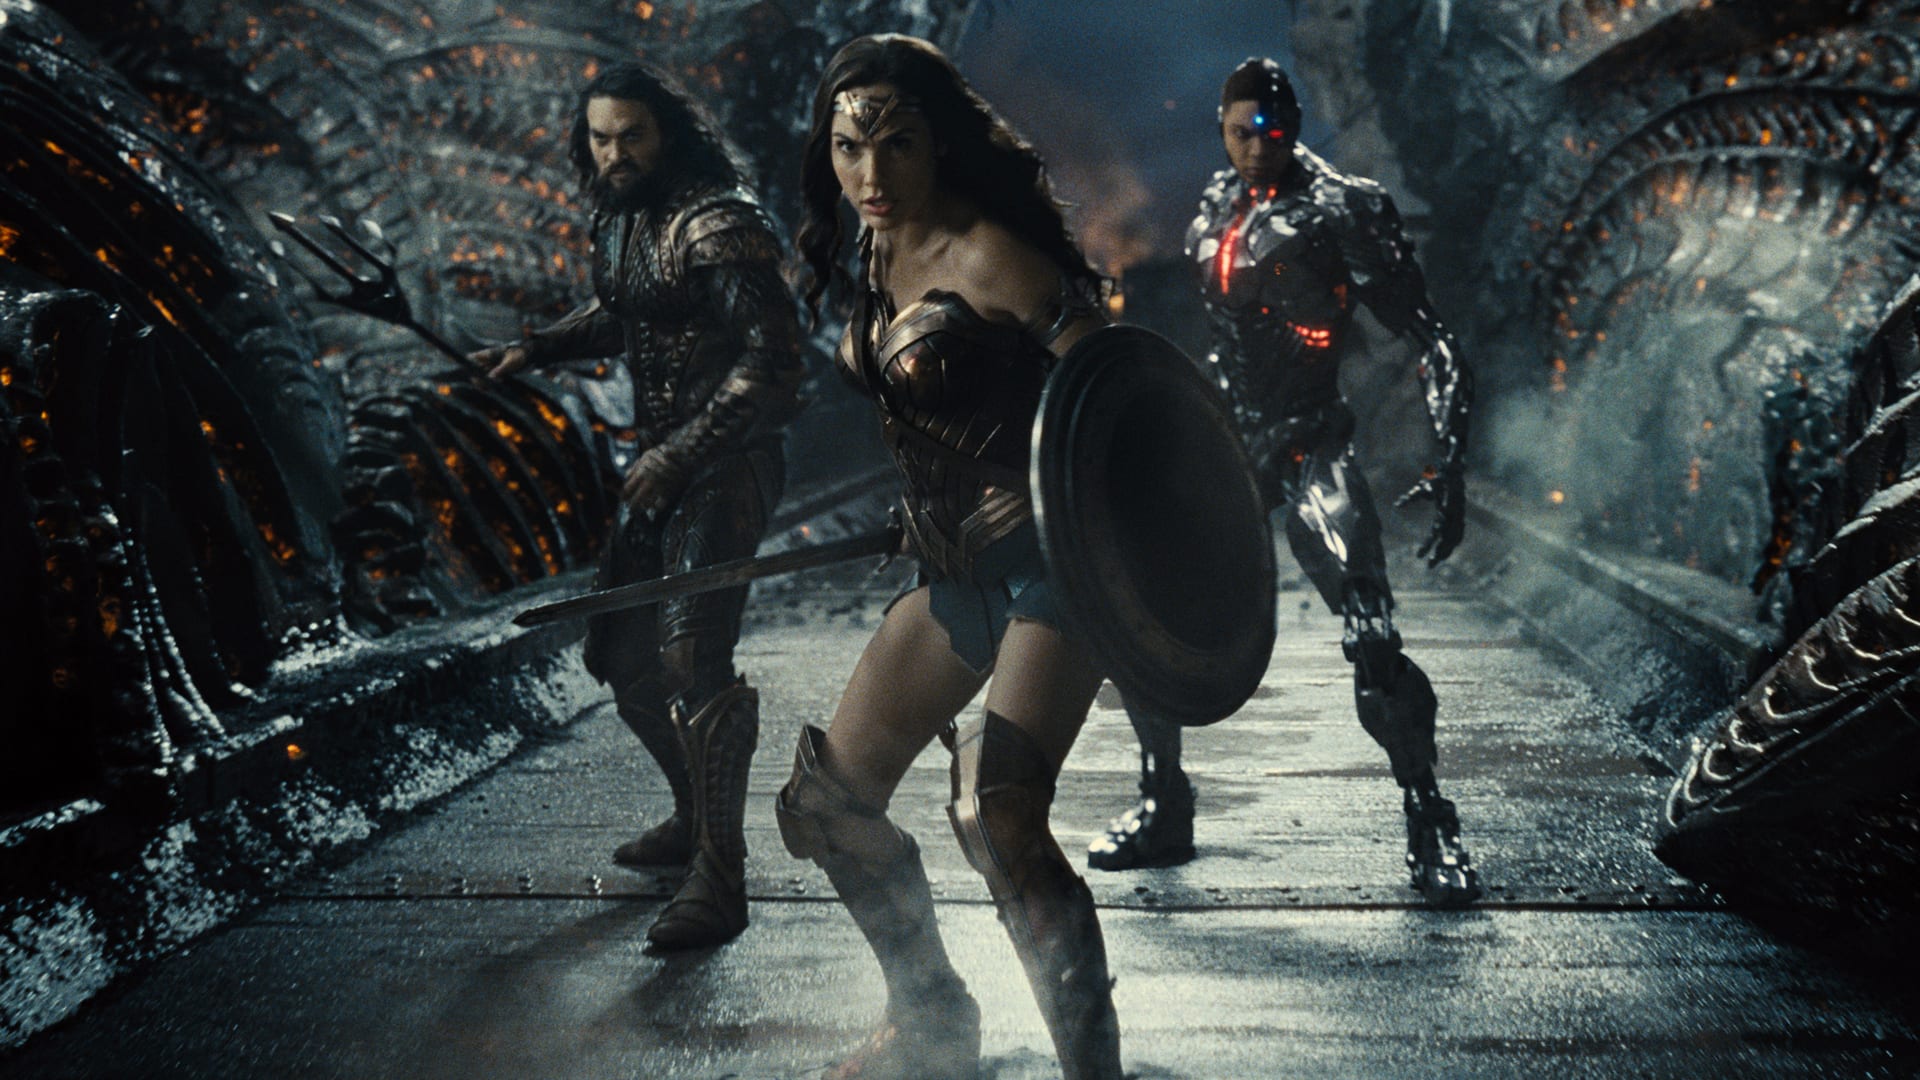 A casual fan’s guide to jumping right into the Snyder cut of ‘Justice League’